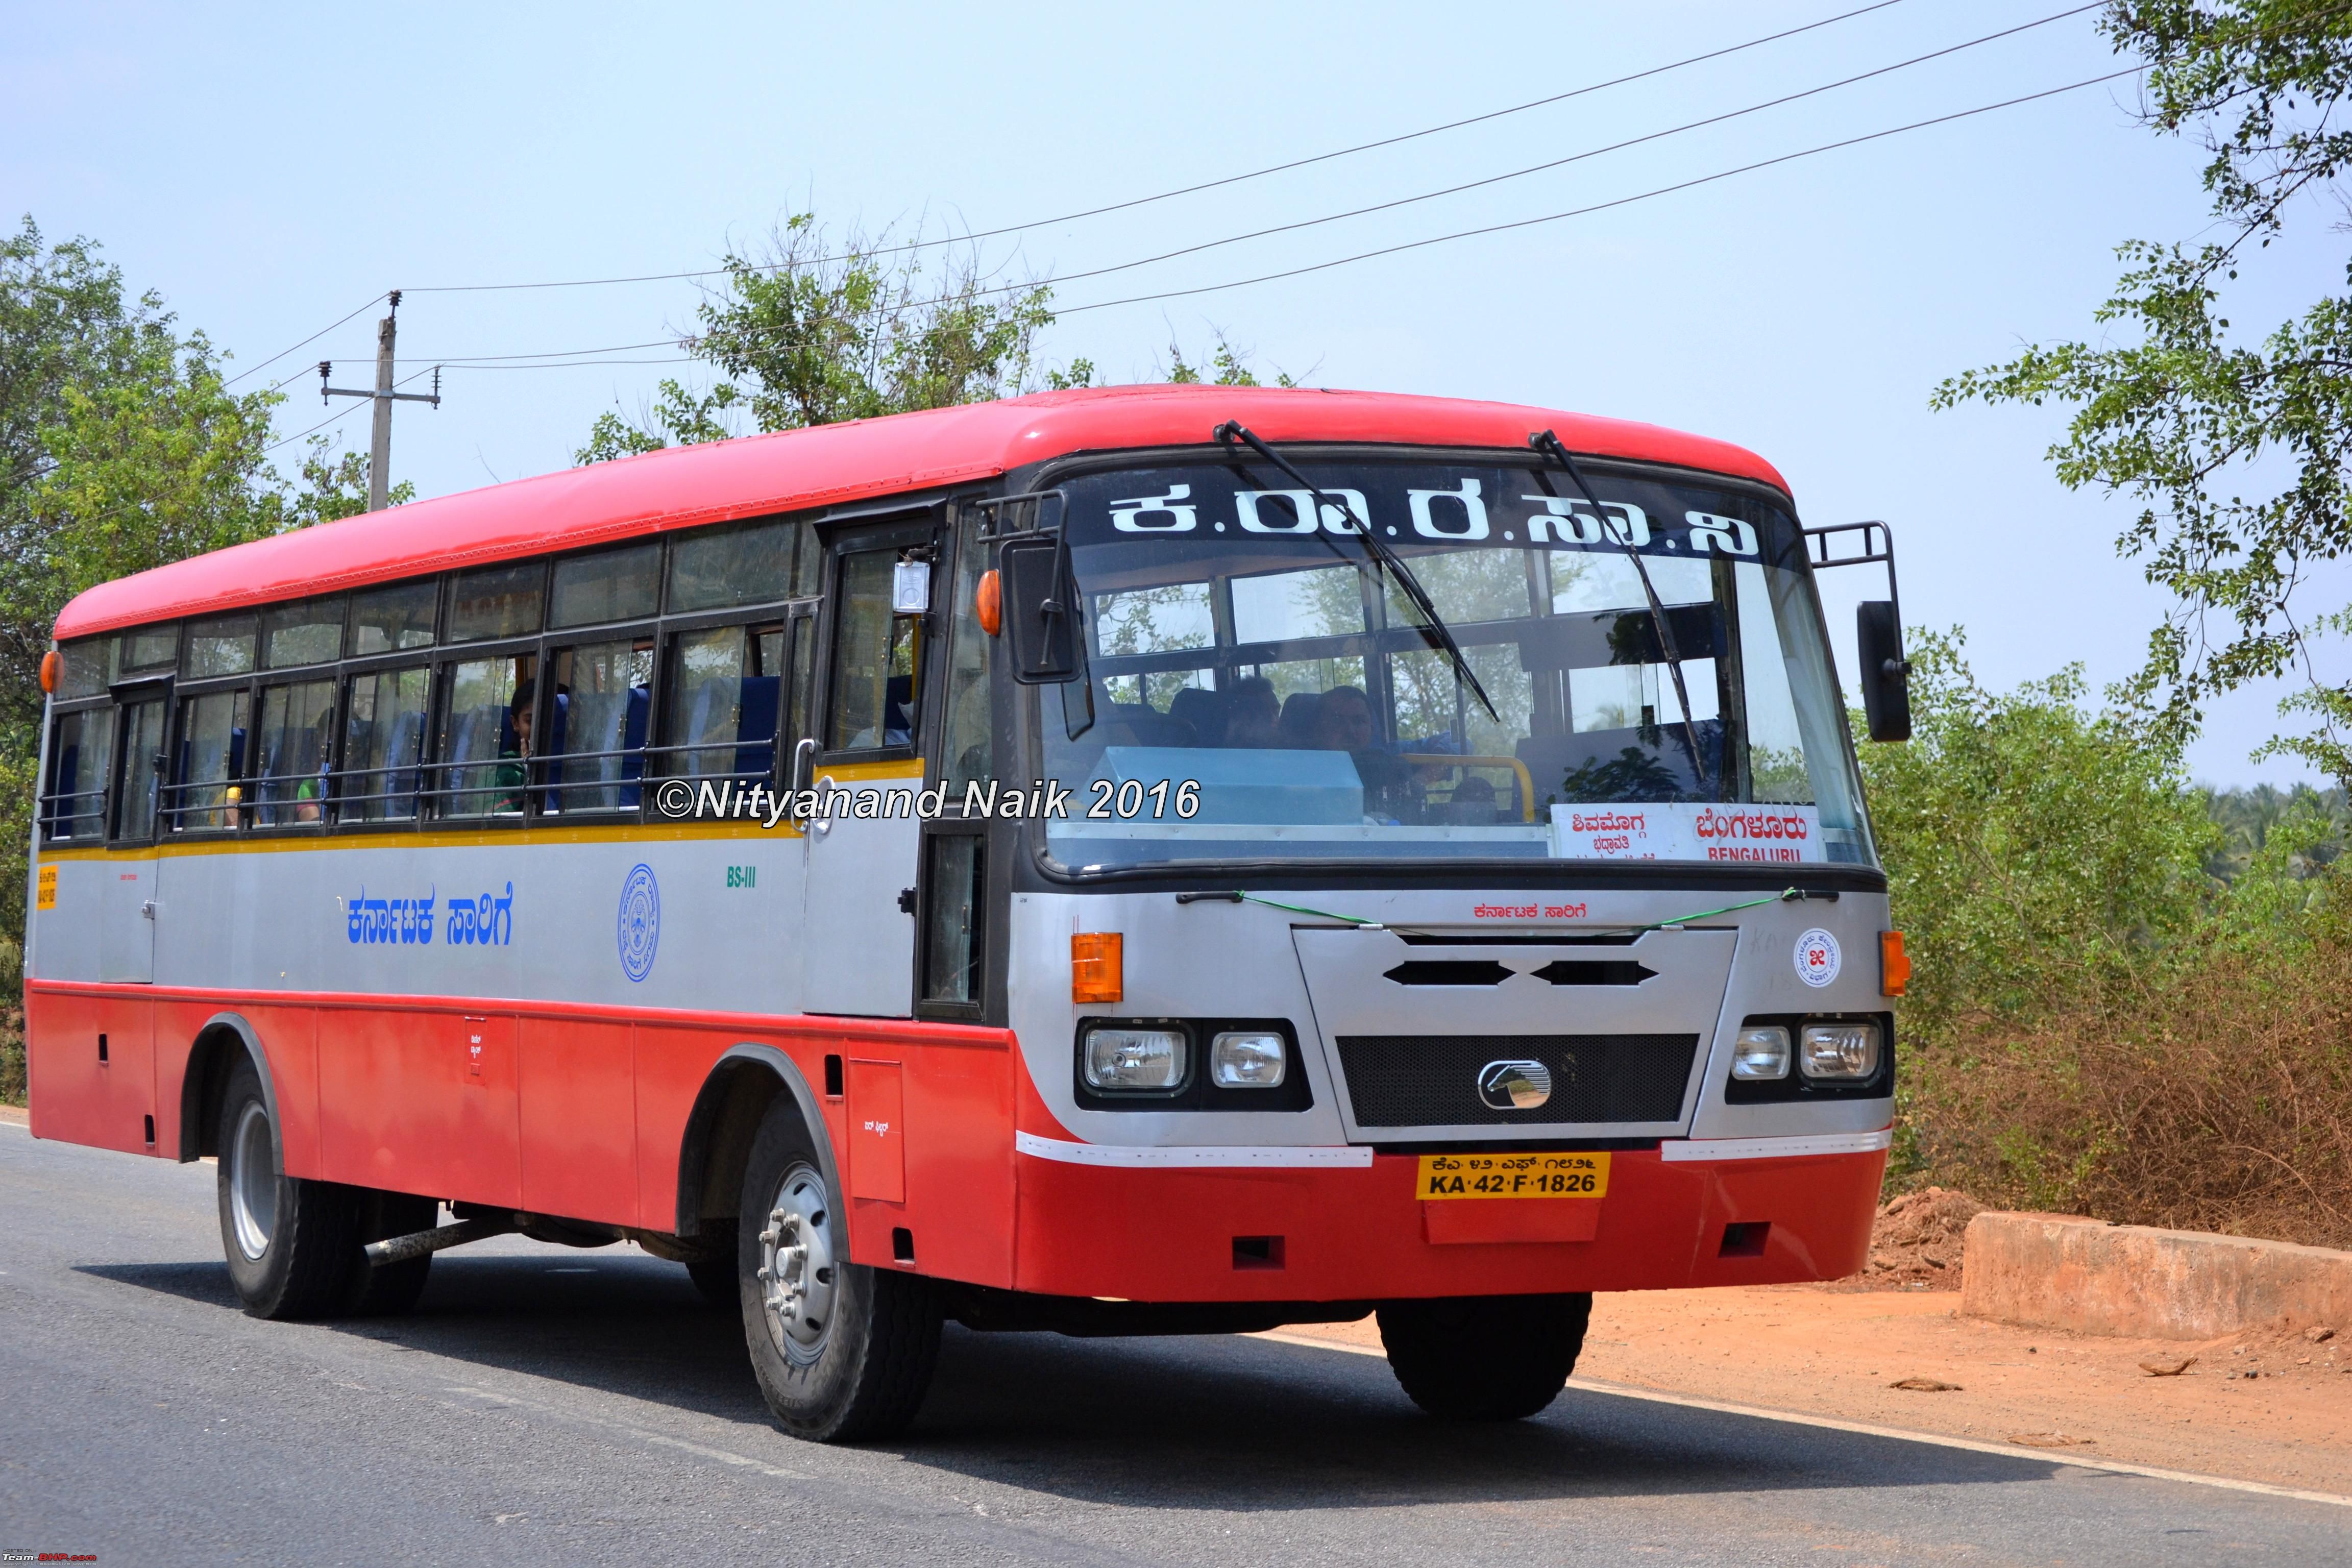 Eicher Buses making a comeback